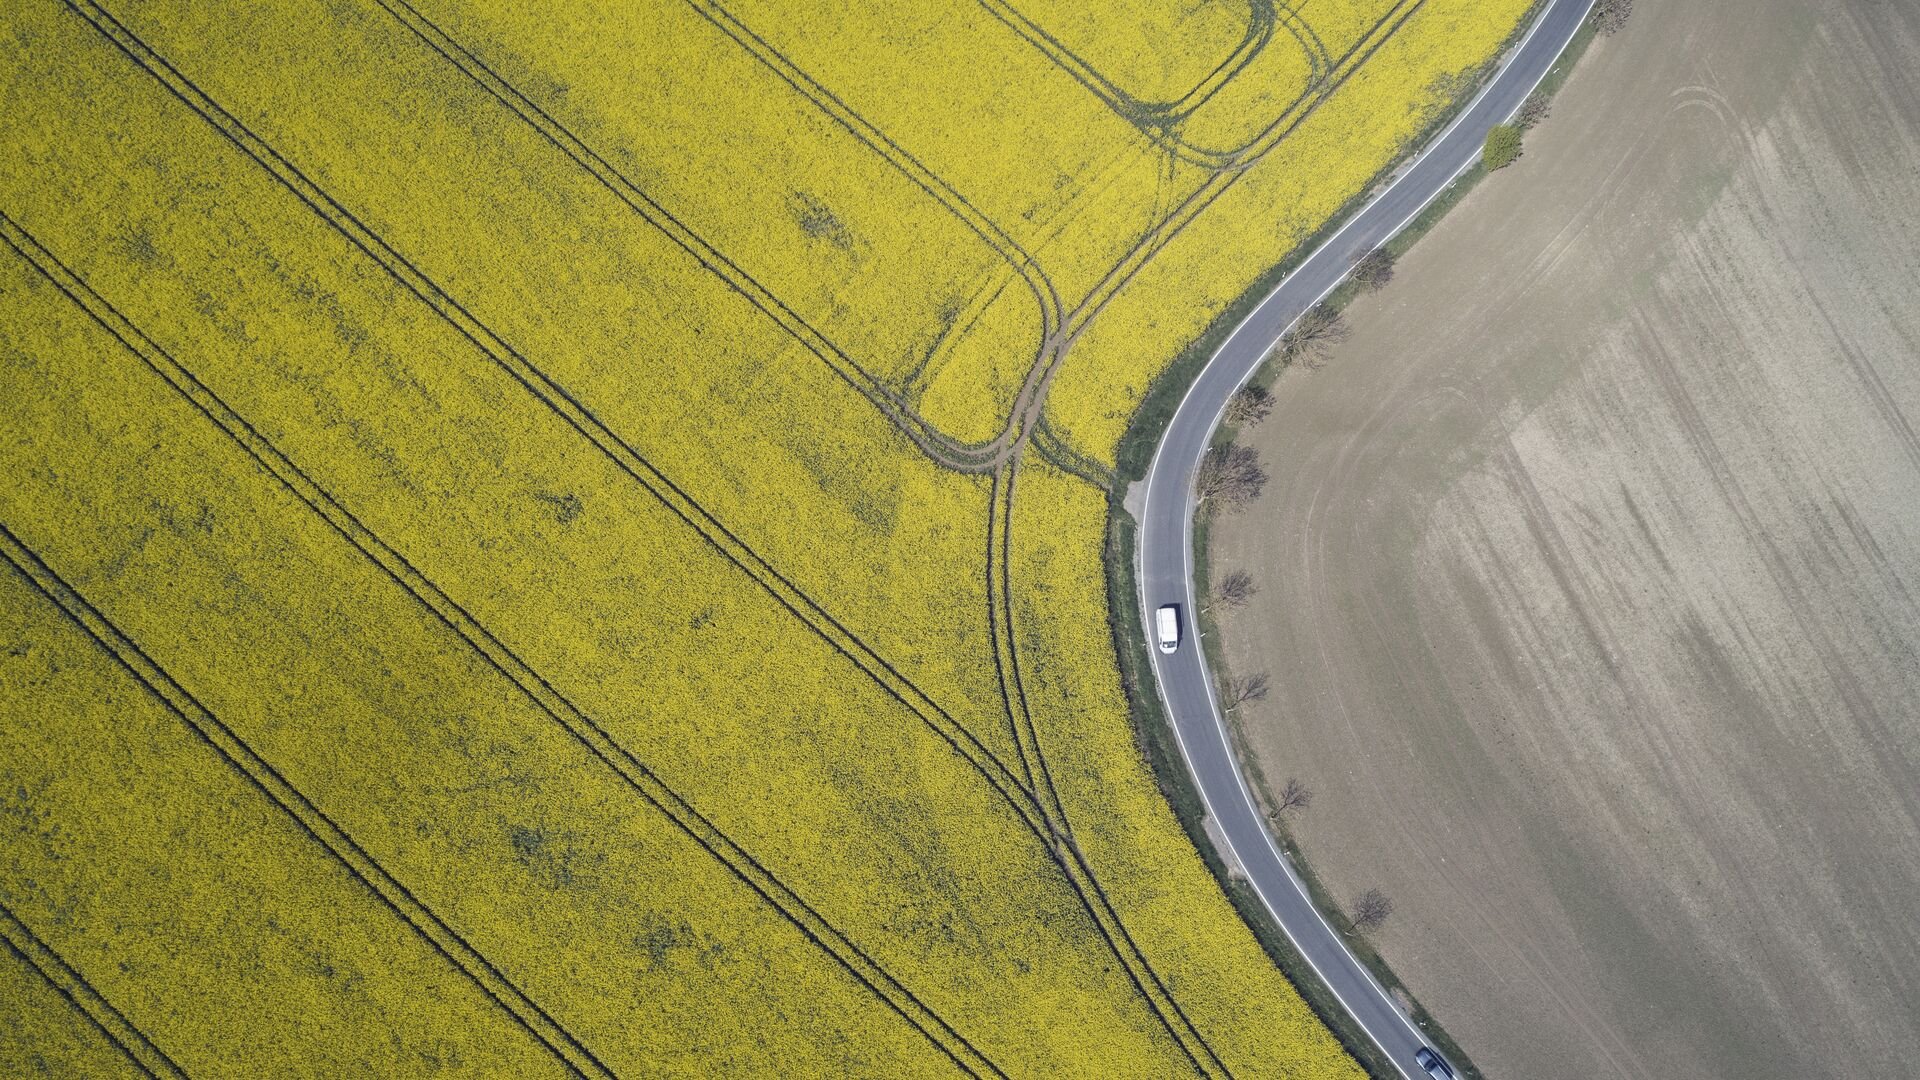 Aerial view of rural road with traffic and oilseed rape field